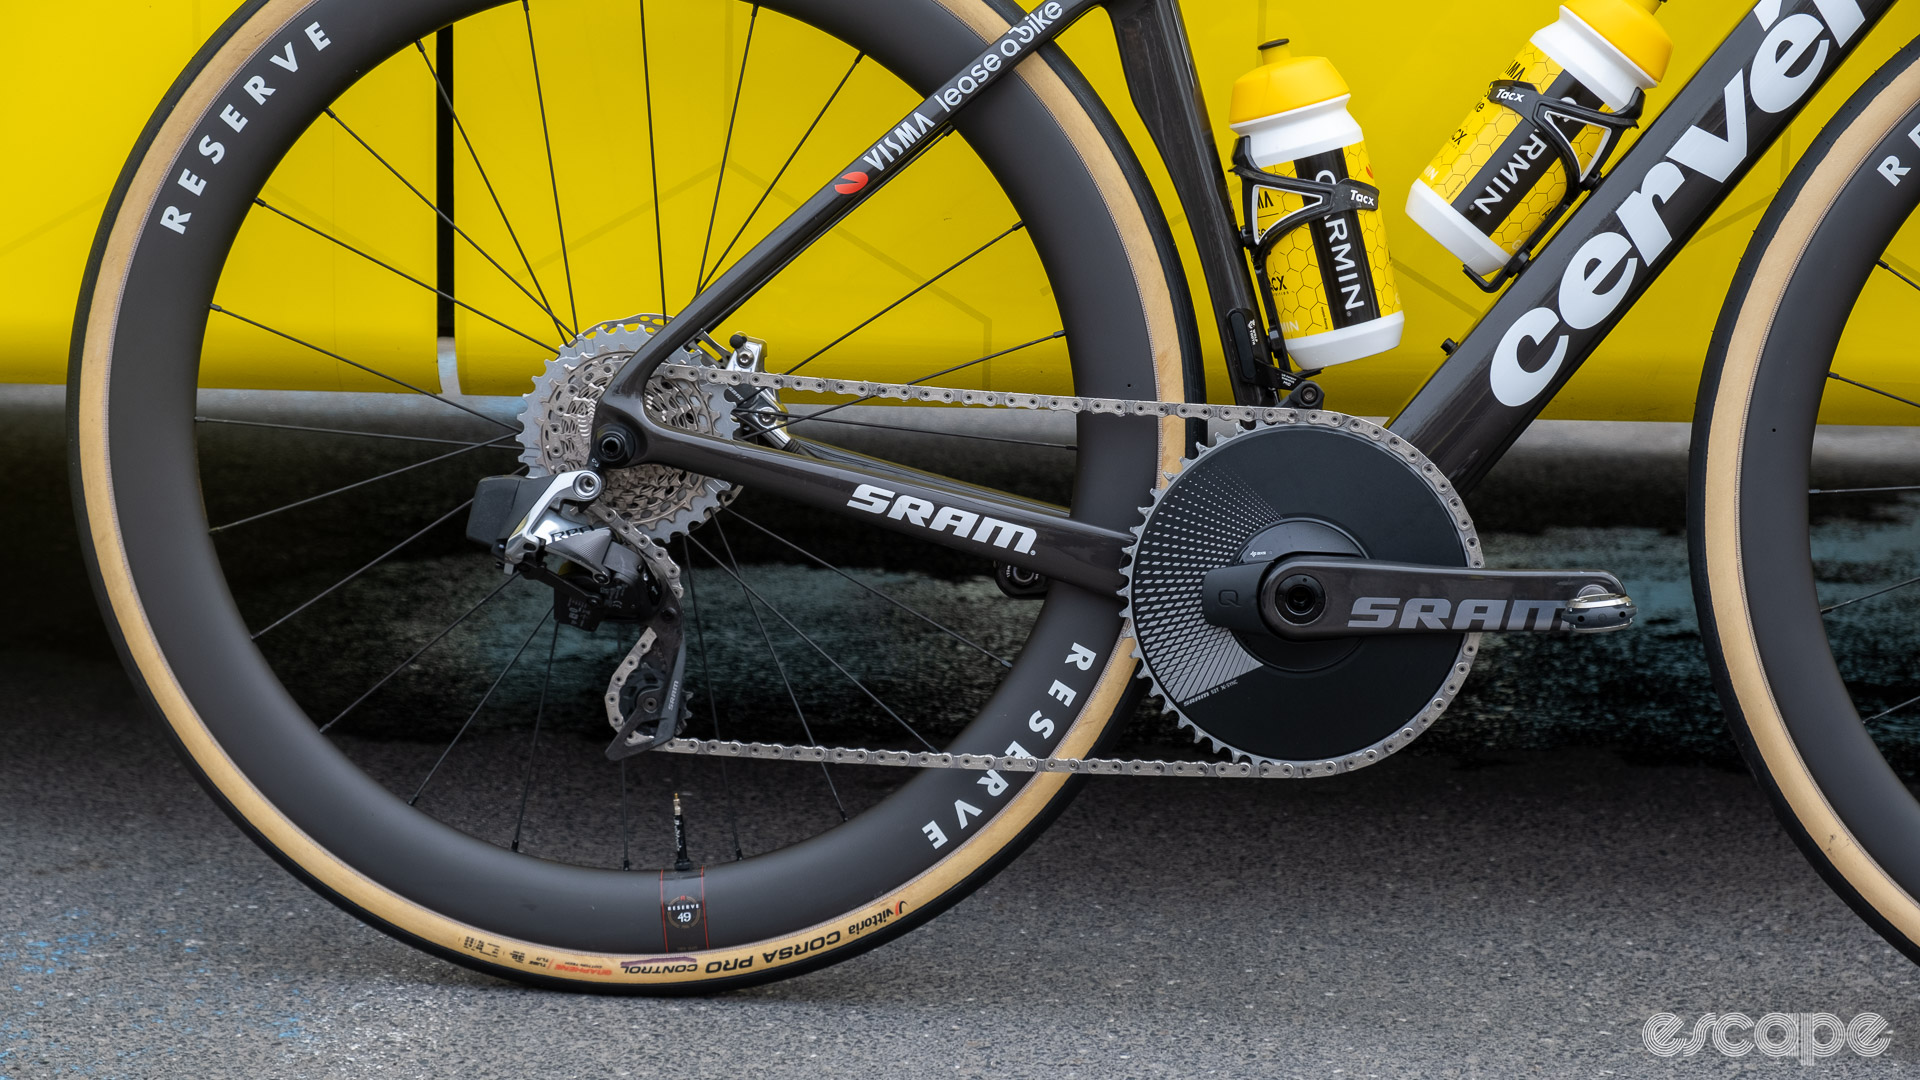 The image shows the drivetrain on Marianne Vos' Cervelo Soloist.